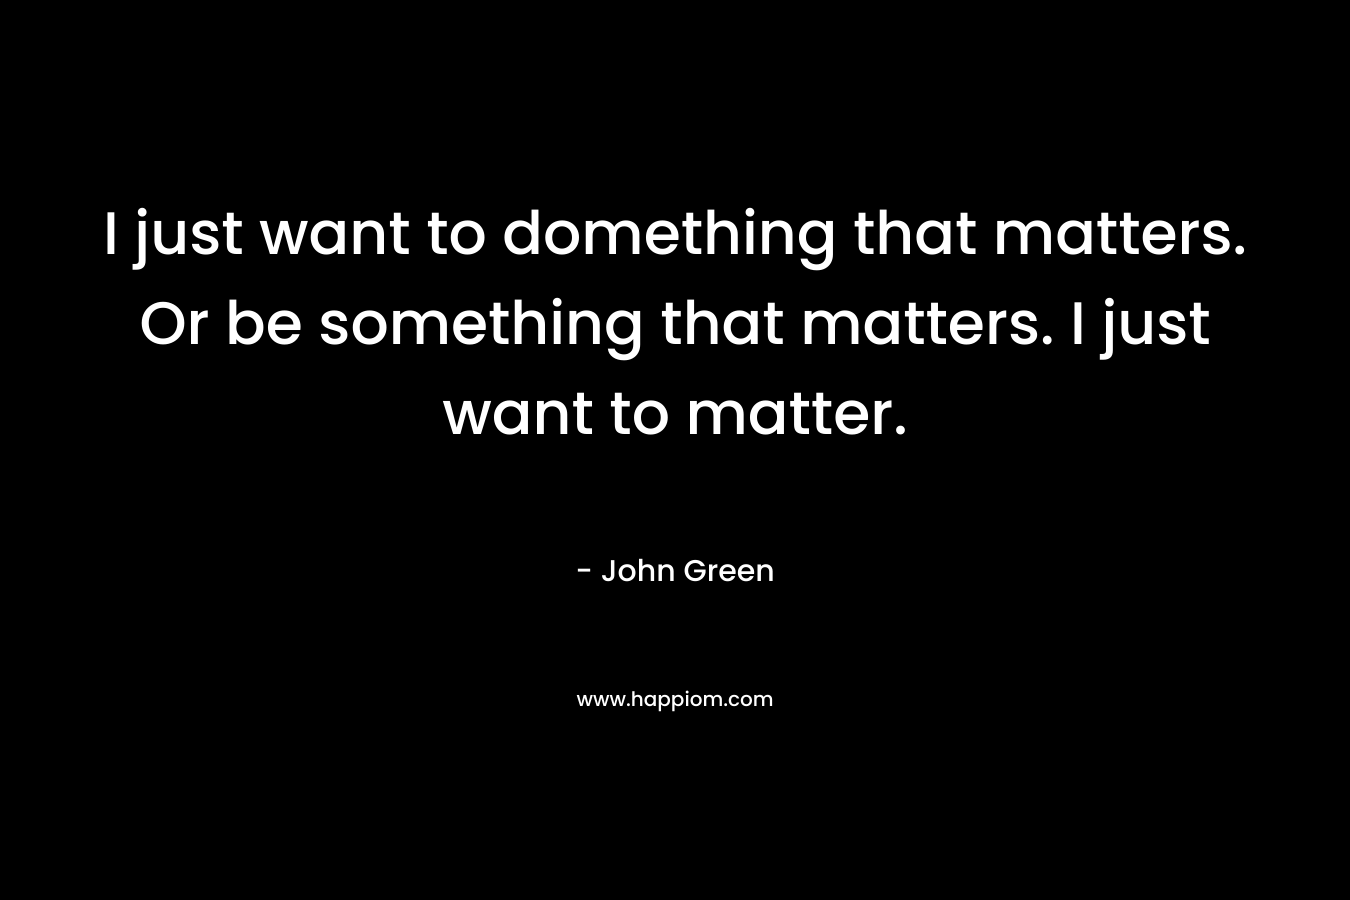 I just want to domething that matters. Or be something that matters. I just want to matter.